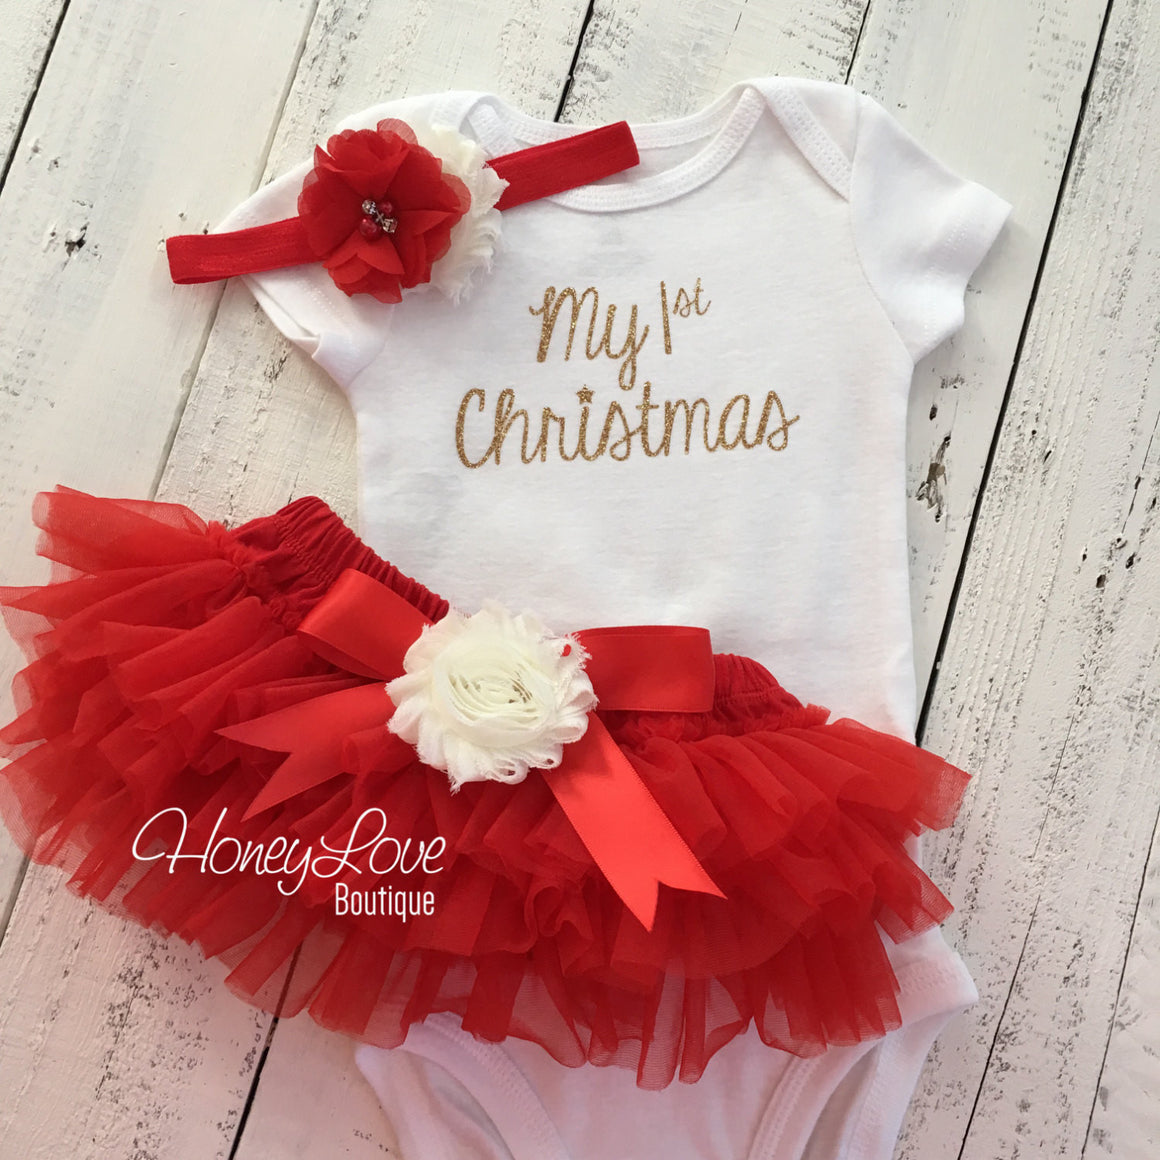 My 1st Christmas Outfit -  Gold/Silver -  Red and Ivory - Embellished tutu skirt bloomers - HoneyLoveBoutique